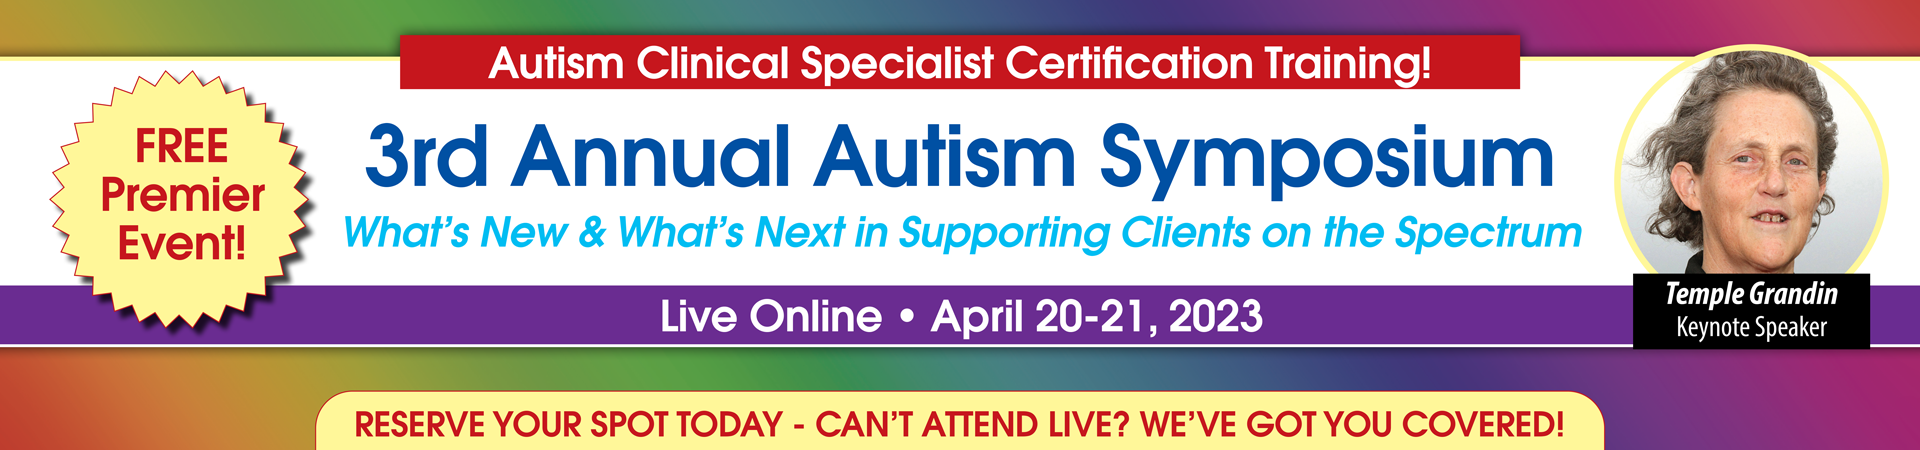 2-Day Autism Symposium: What's New & What's Next in Treating Clients on the Spectrumm